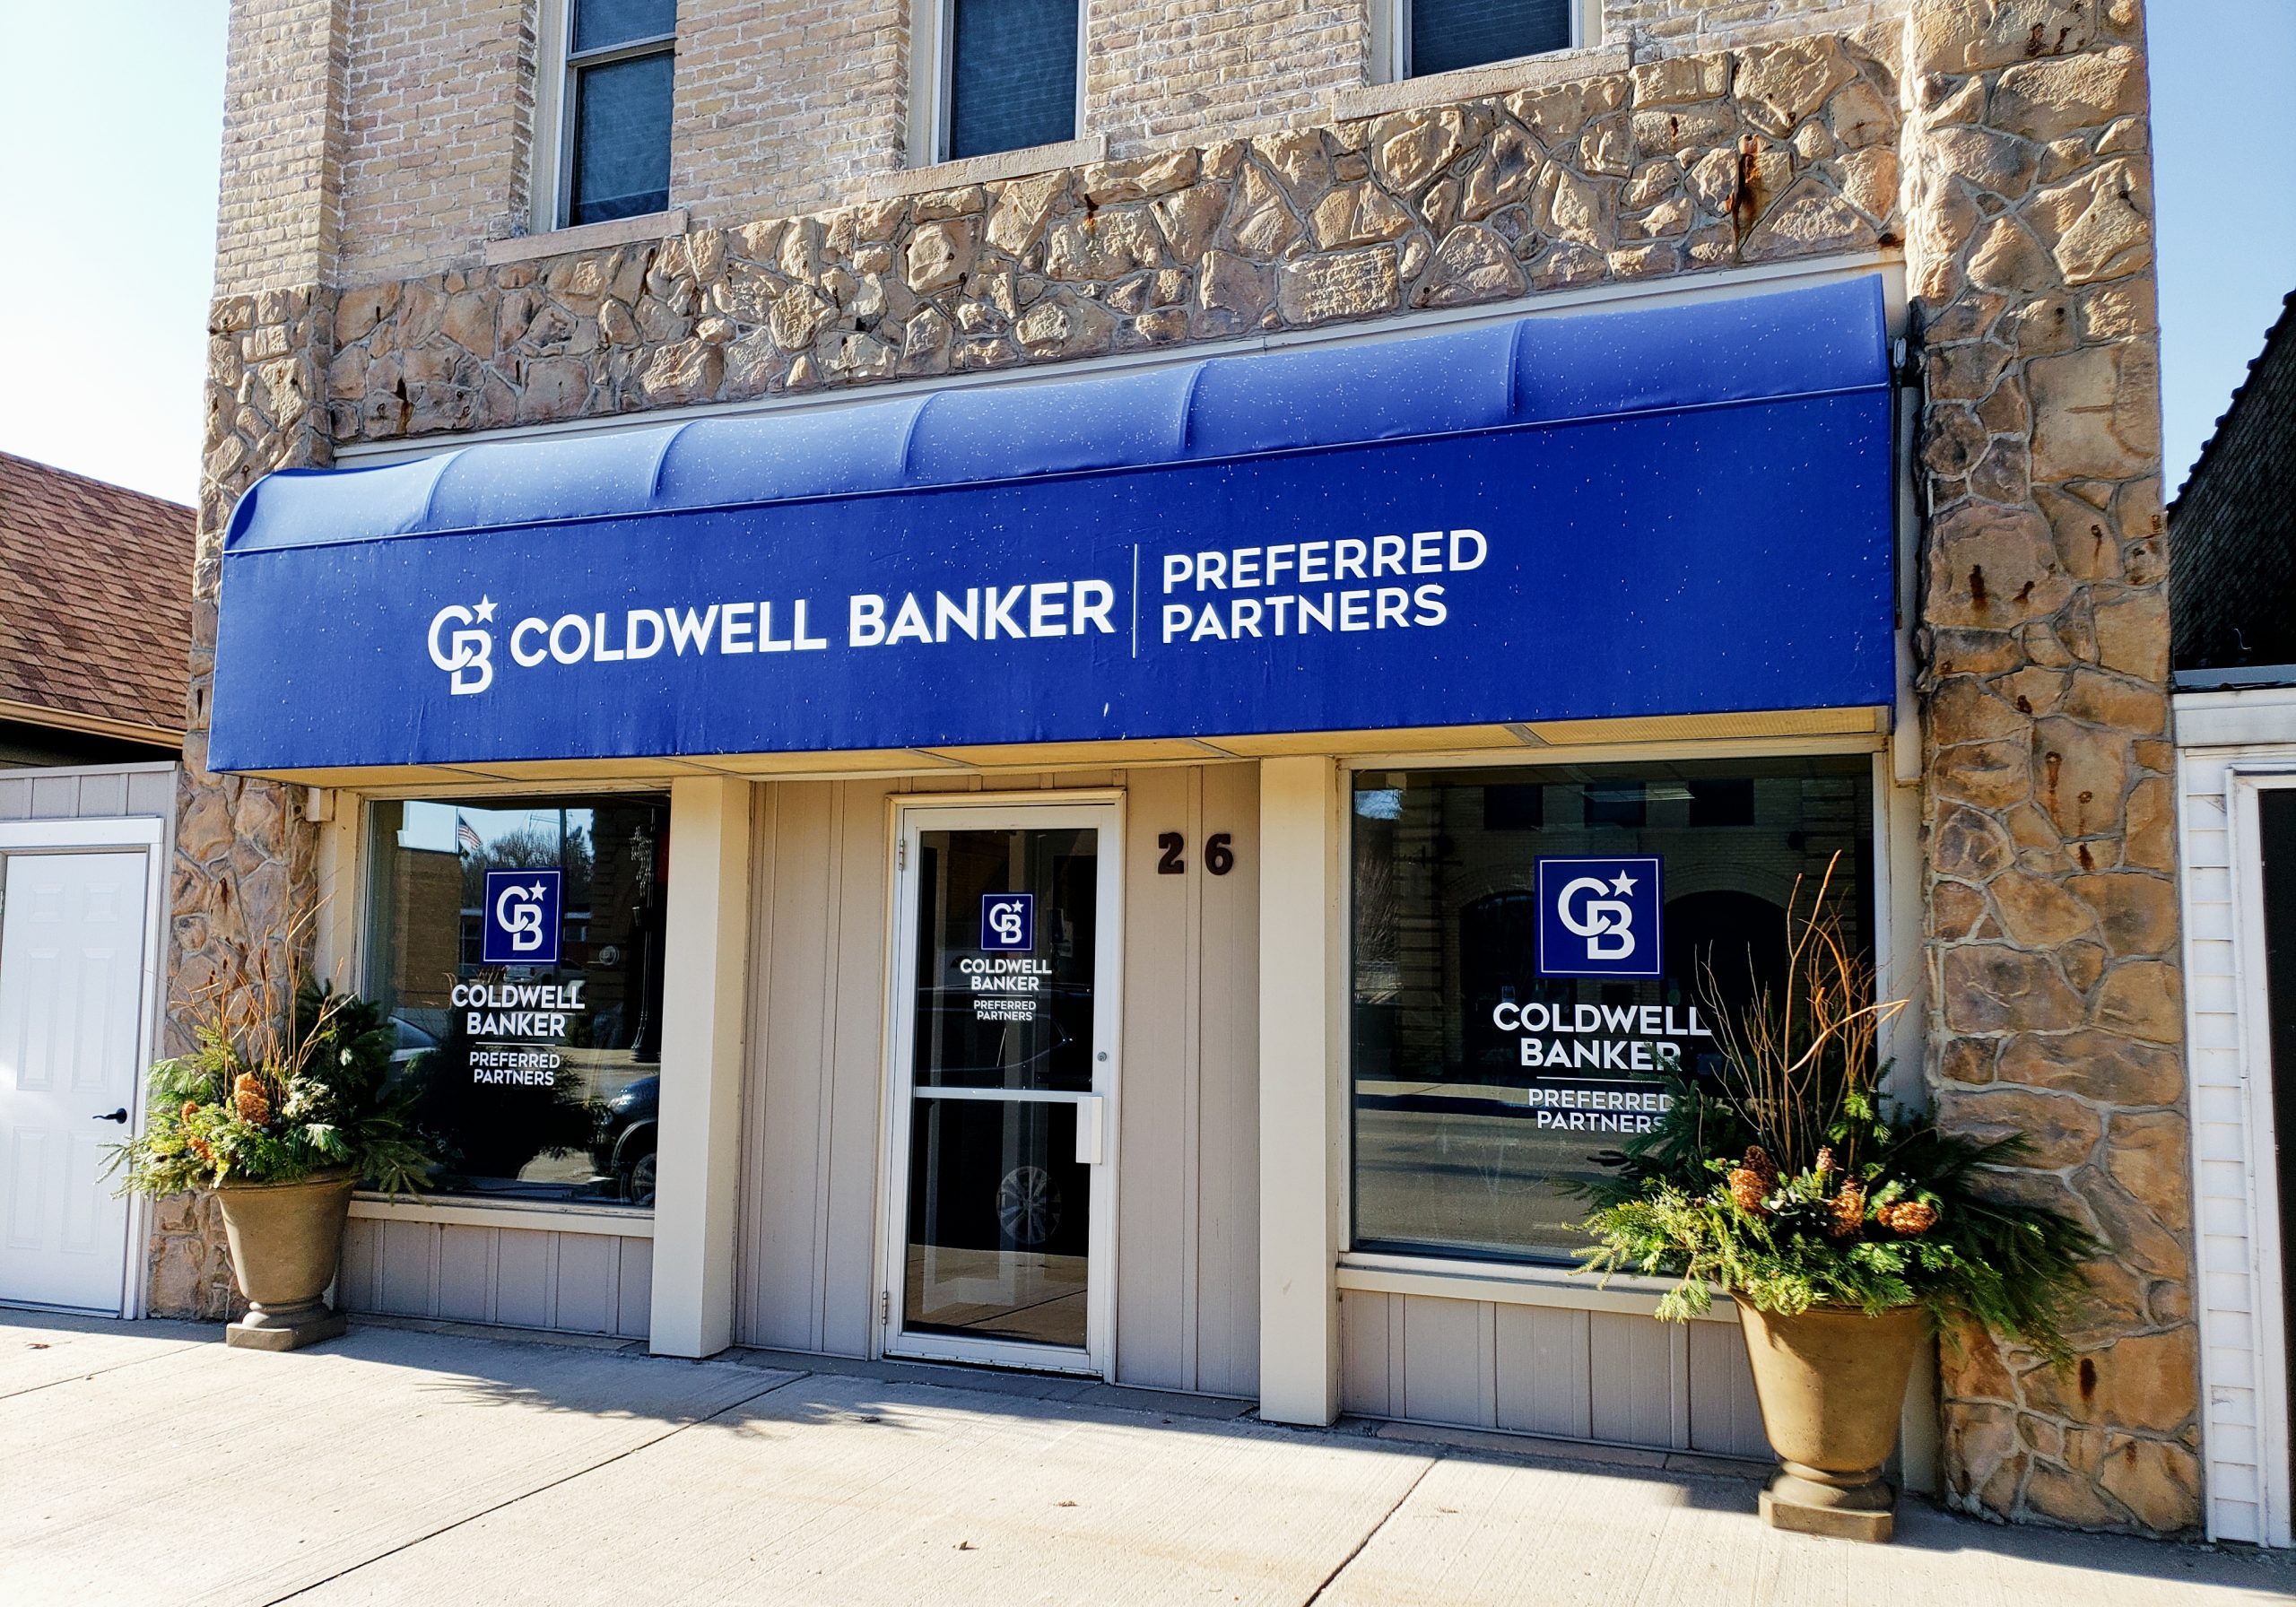 Coldwell Banker Preferred Partners